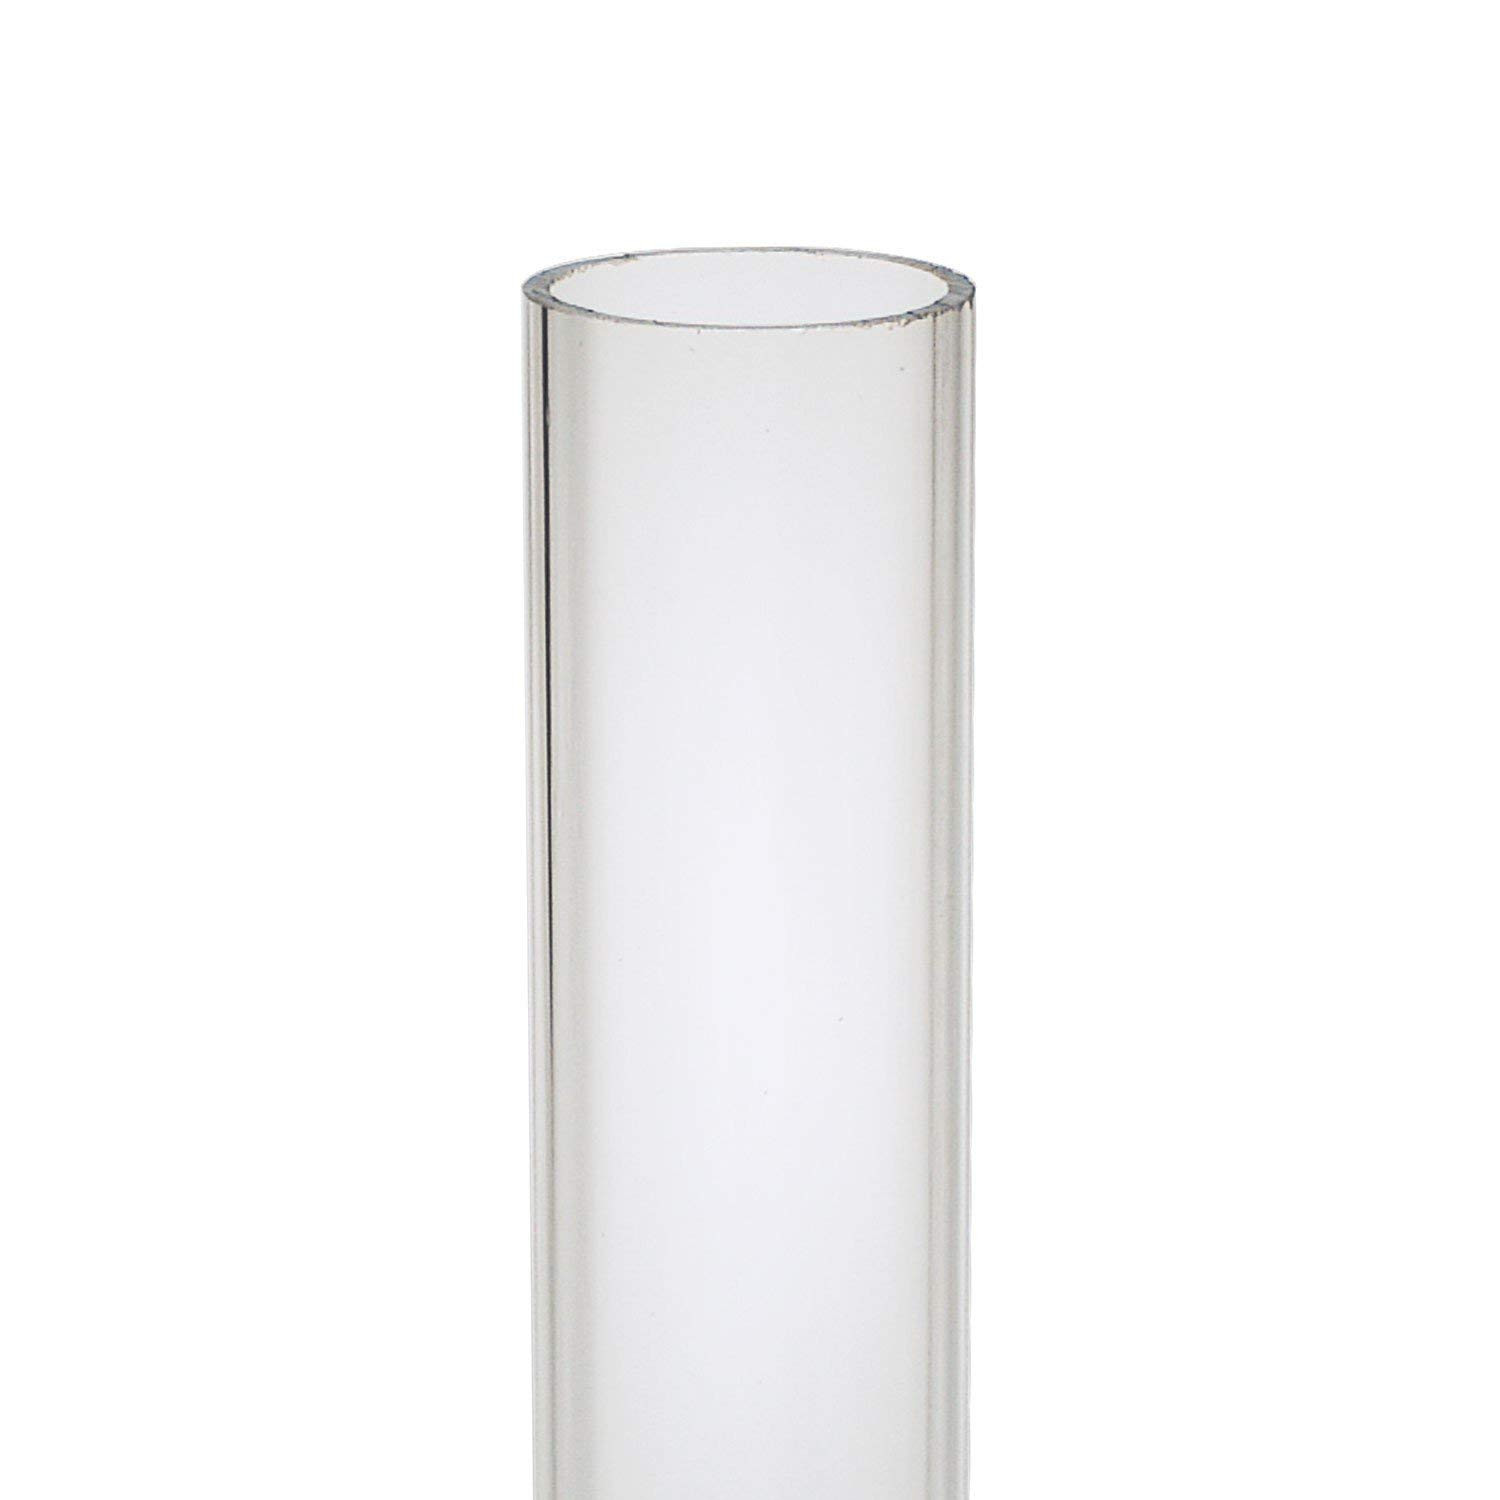 18 Recommended Glass Vases Depot Coupon 2024 free download glass vases depot coupon of amazon com source one deluxe clear acrylic tube 2 inches thick 12 pertaining to amazon com source one deluxe clear acrylic tube 2 inches thick 12 inch 2 inch wide